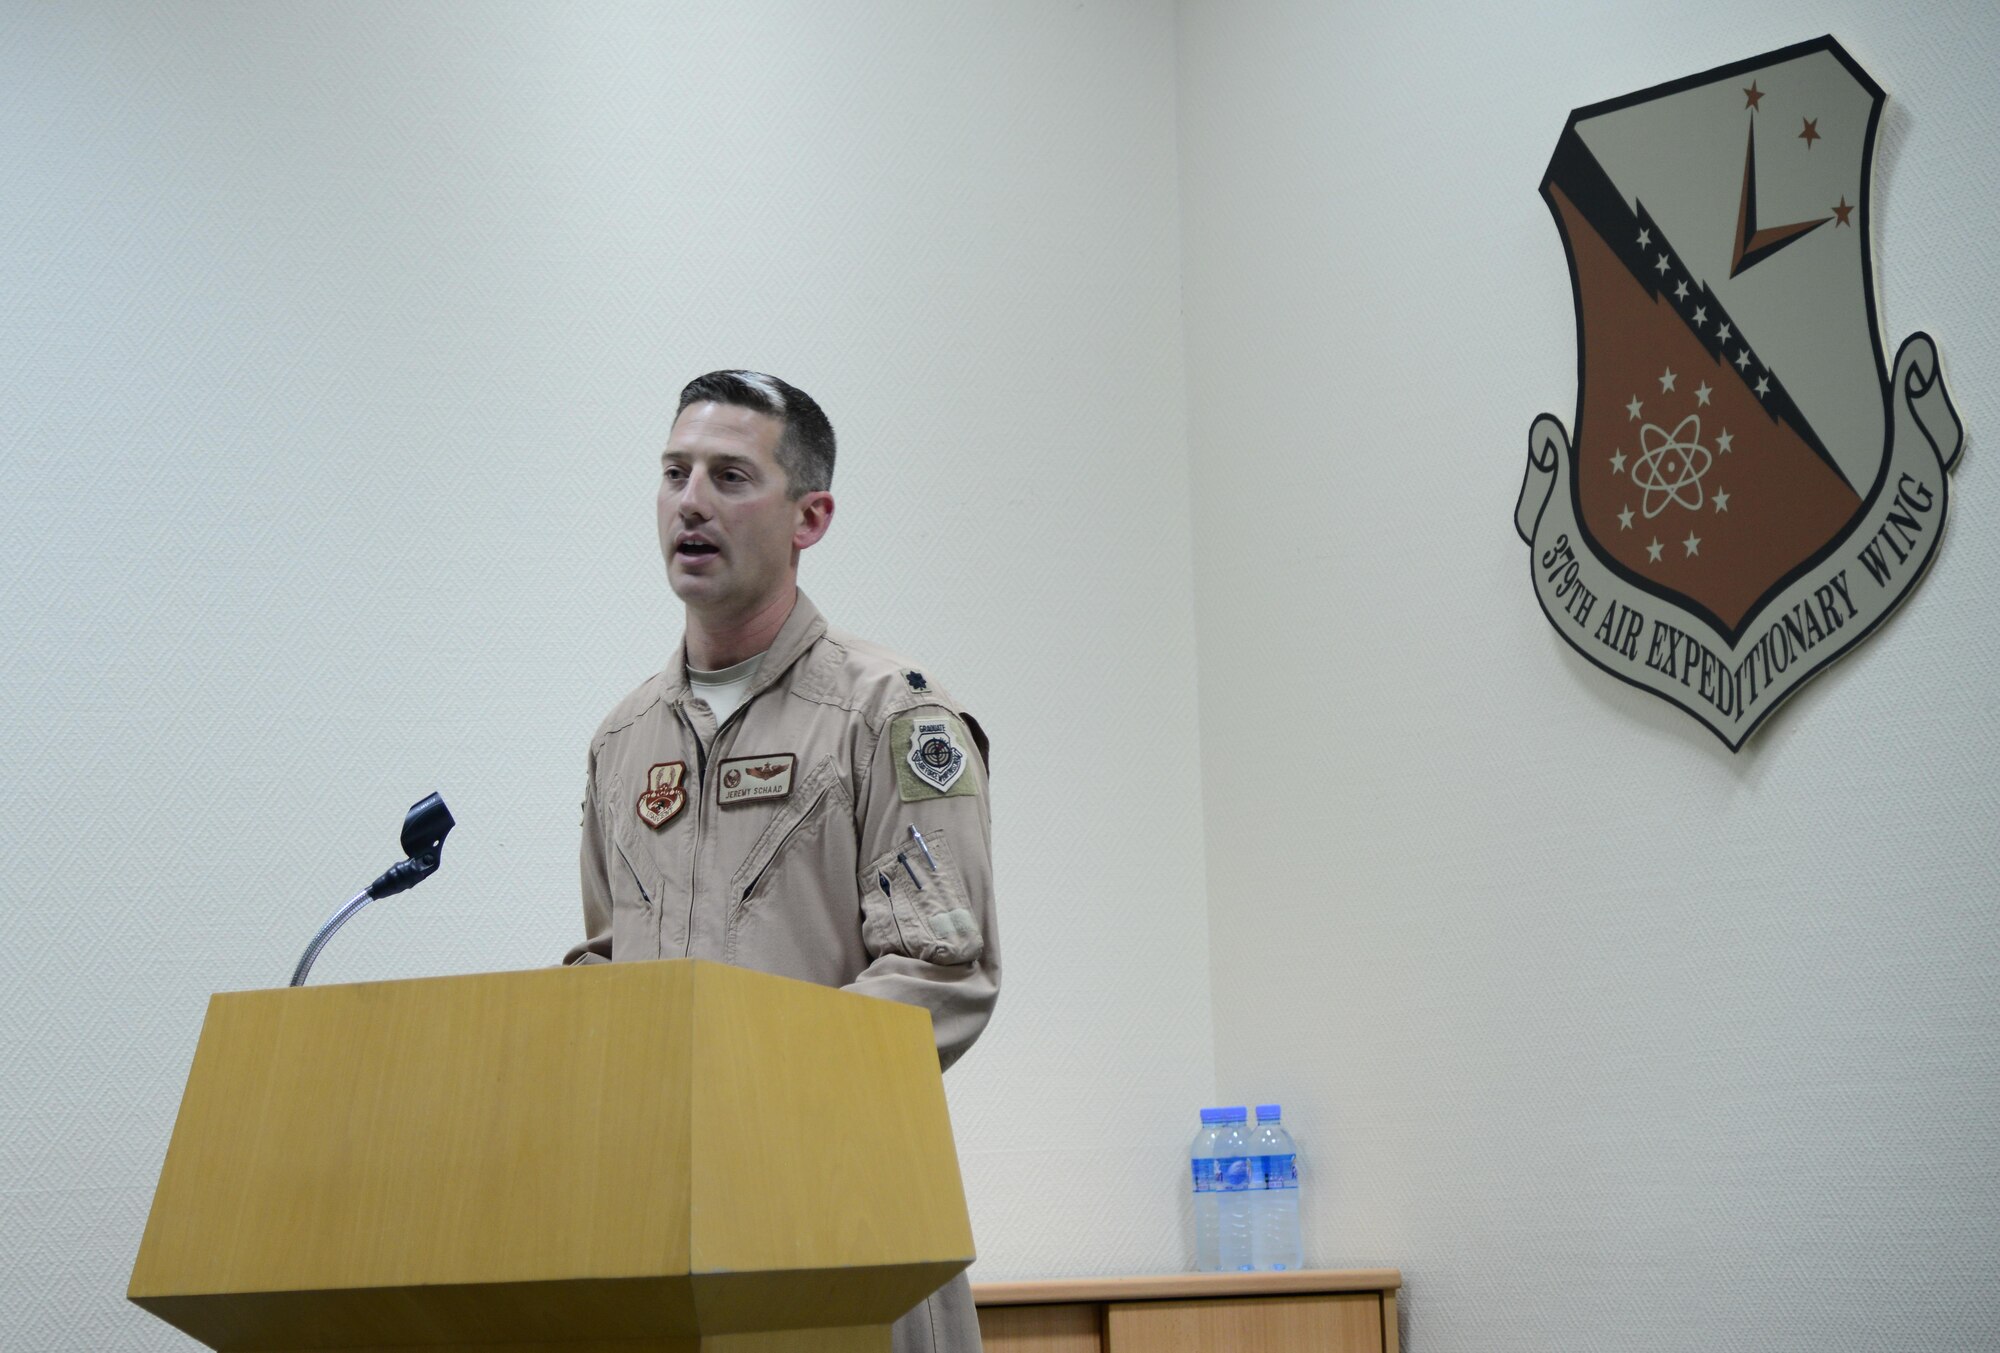 U.S. Air Force Lt. Col. Jeremy Schaad gives remarks before handing over command  of the 746th Expeditionary Airlift Squadron during a change of command ceremony, March 1, 2015, at Al Udeid Air Base, Qatar. Schaad relinquished command of the 746th EAS to Lt. Col. Byron Newell. (U.S. Air Force photo by Senior Airman Kia Atkins)